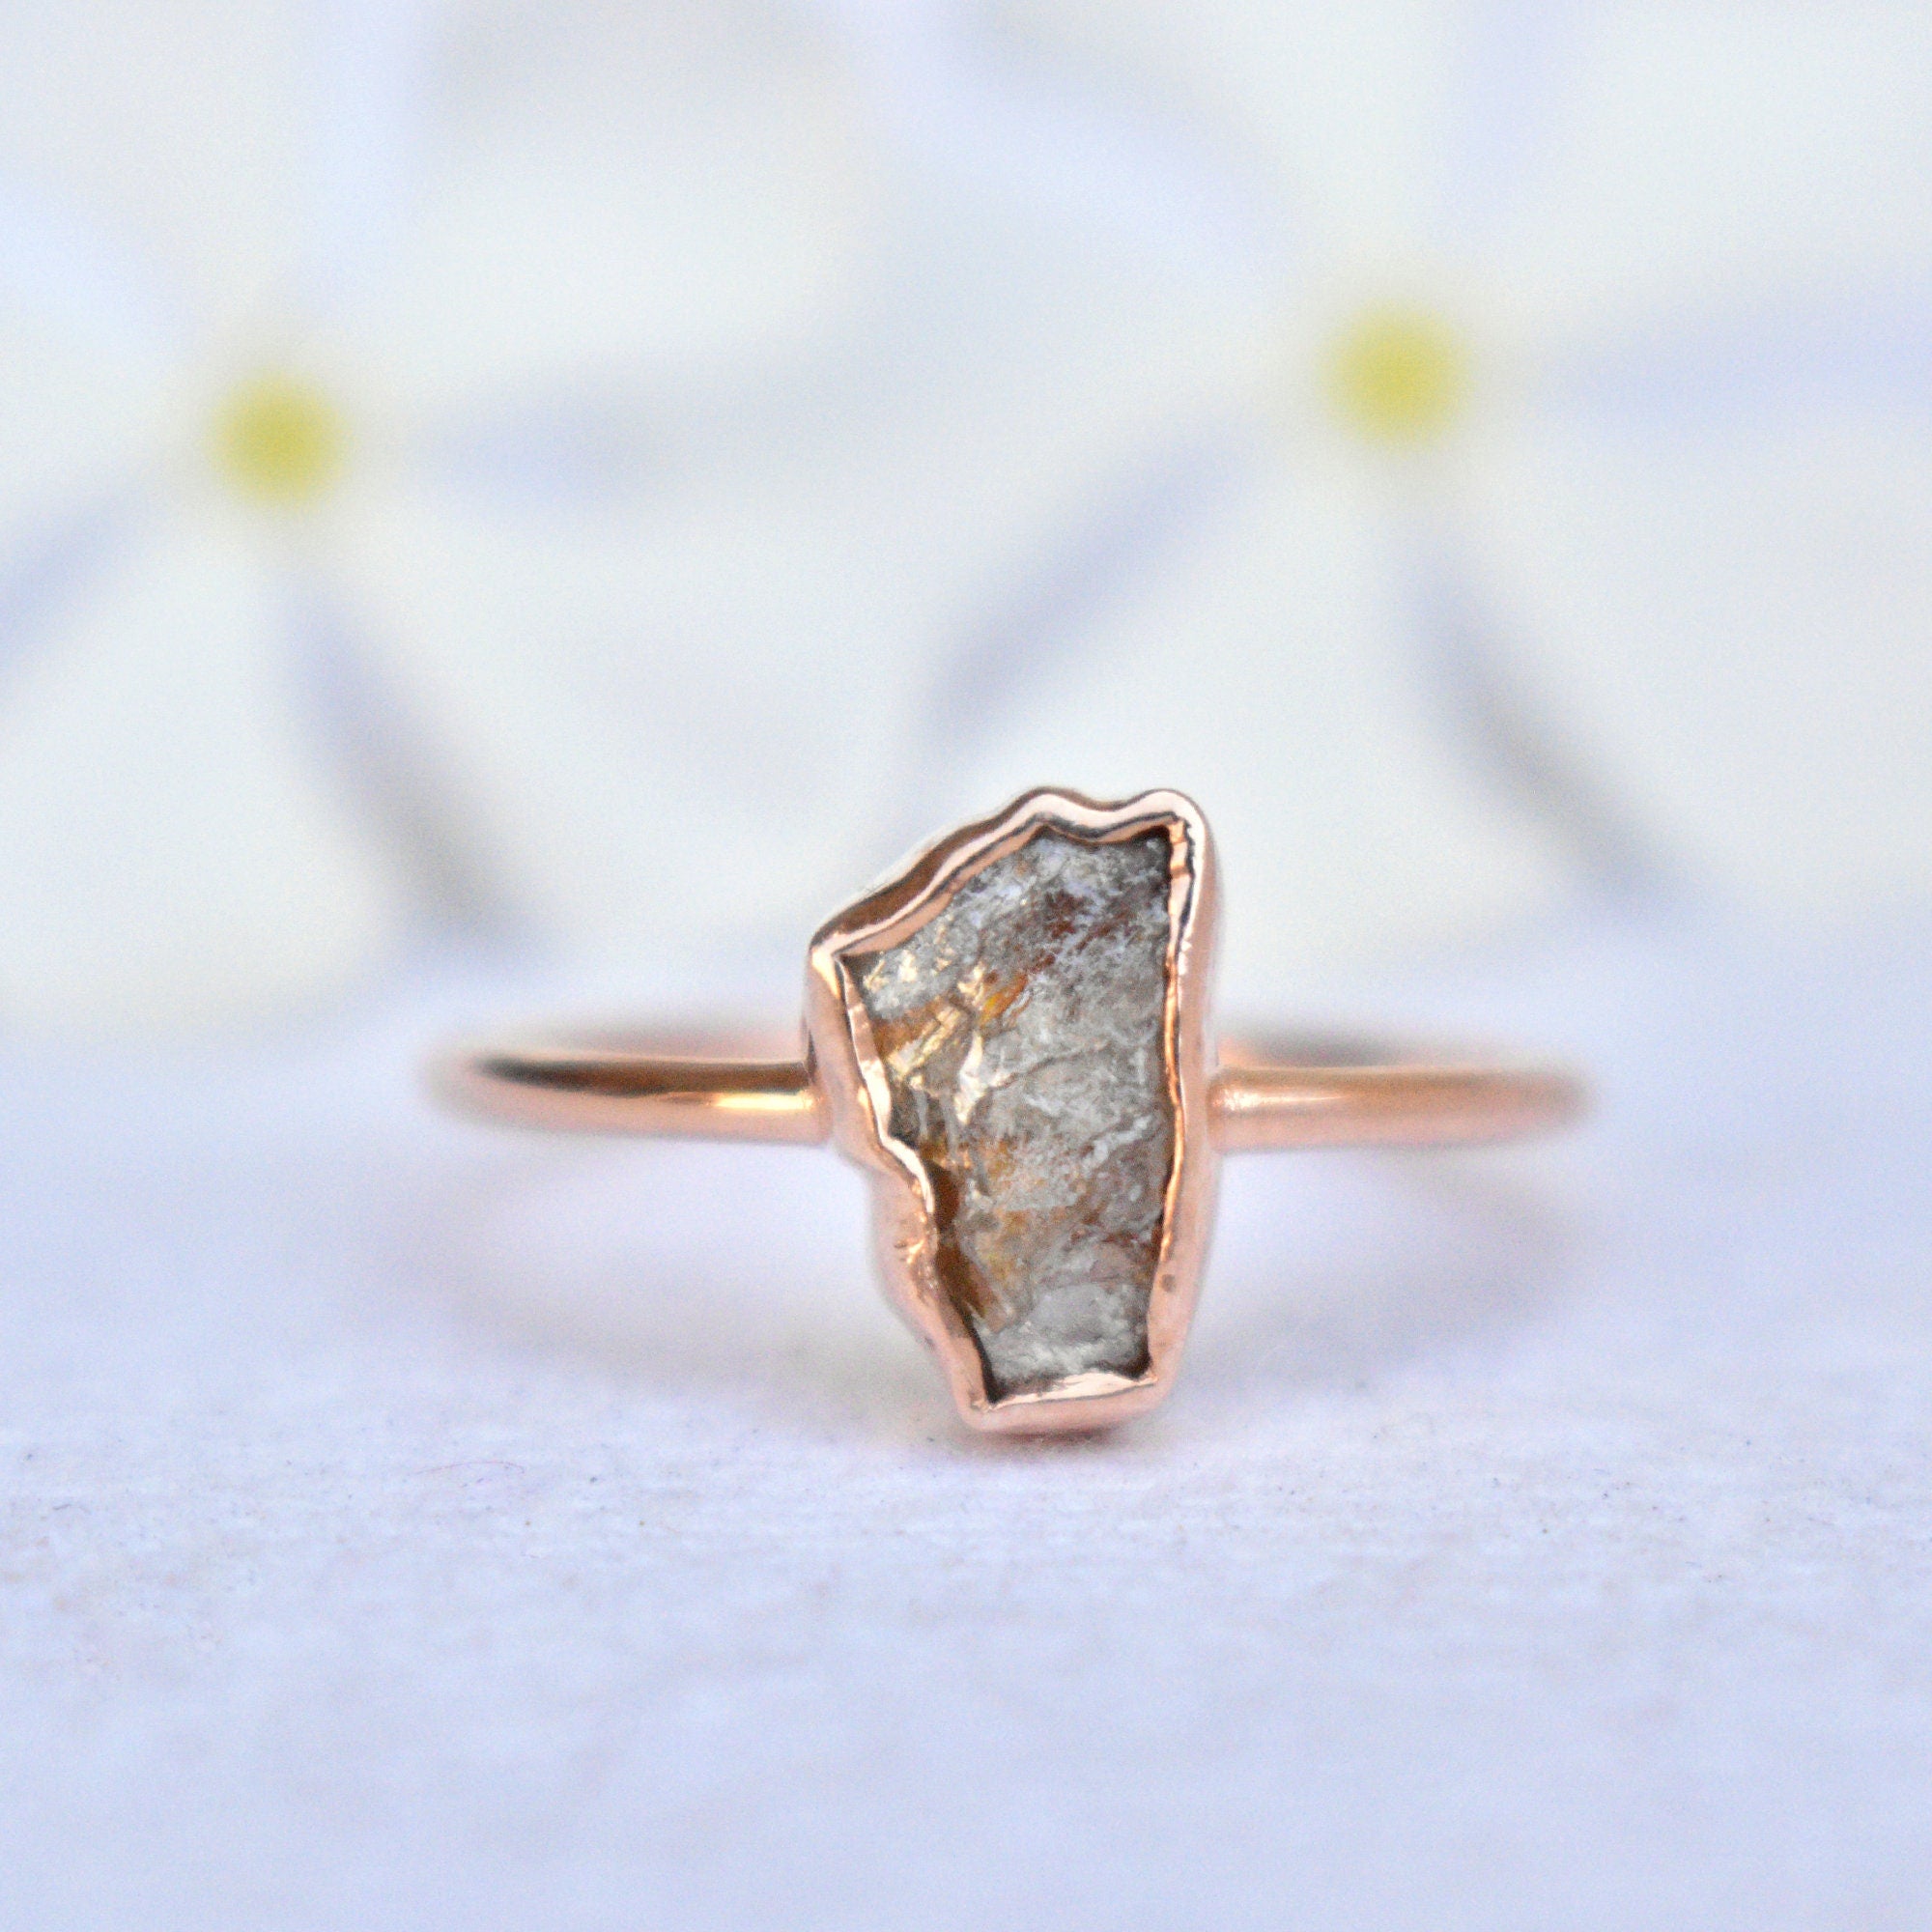 Brown Rough Diamond Bezel Set Engagement Ring, Solid 14K Rose Gold, Chocolate Brown Raw Diamond Bridal Ring, Unique Proposal